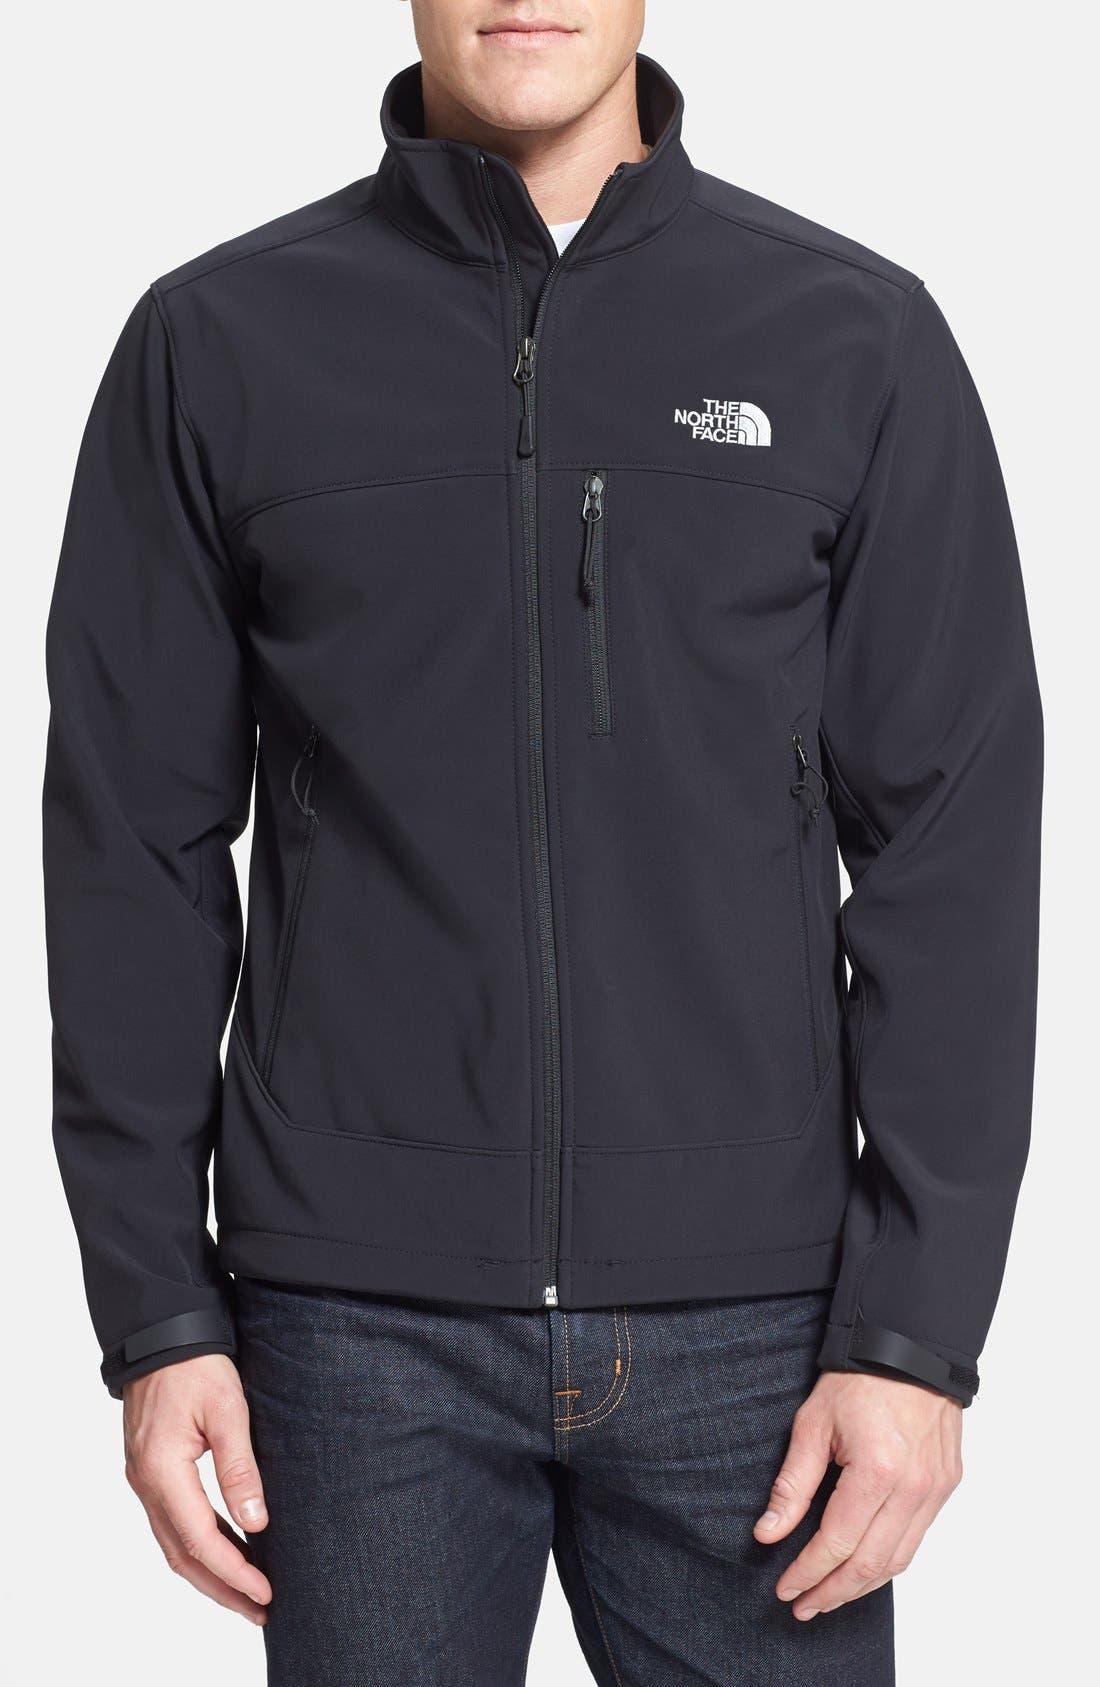 north face jackets water resistant